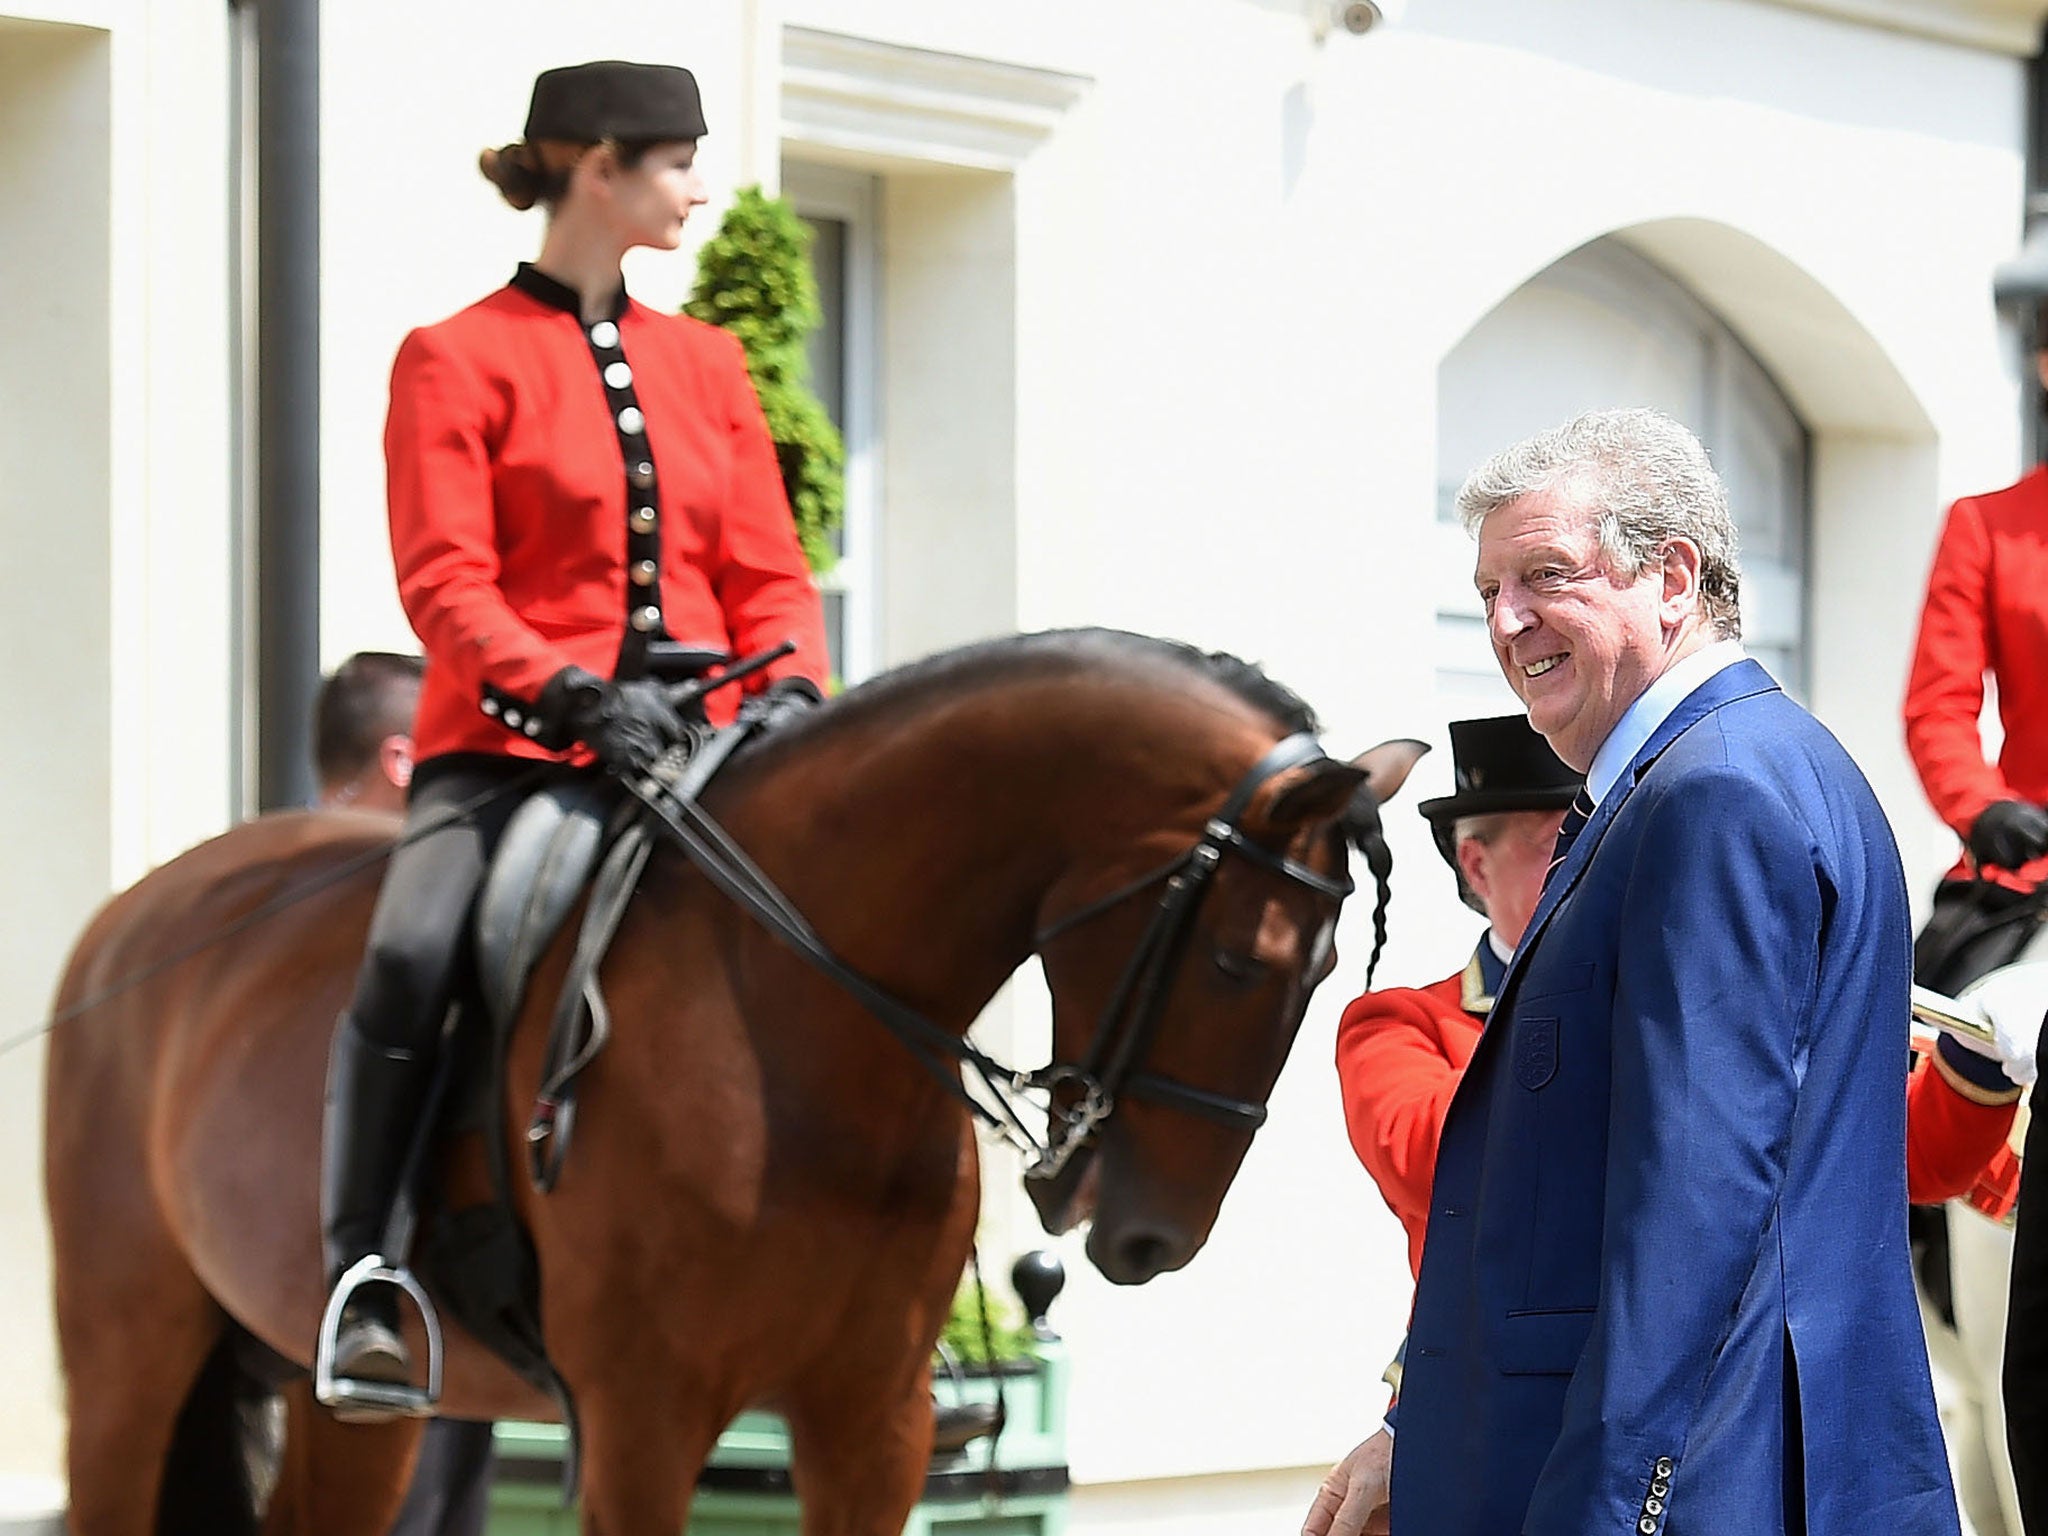 Roy Hodgson arrives at the team hotel in Chantilly - but how long will he be staying?